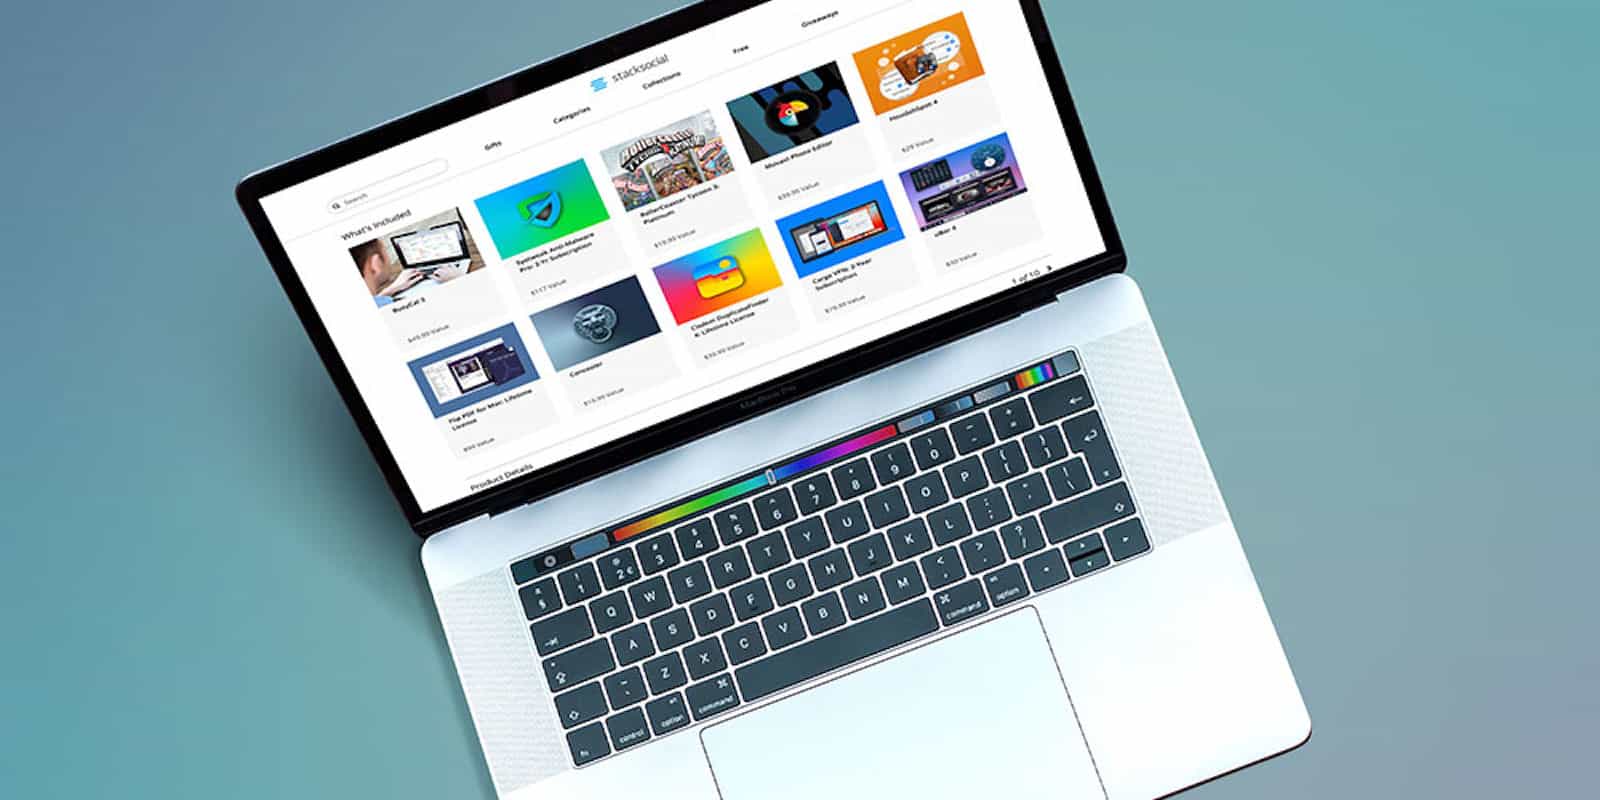 Get the most out of your Mac with this diverse bundle of 10 top-shelf apps.